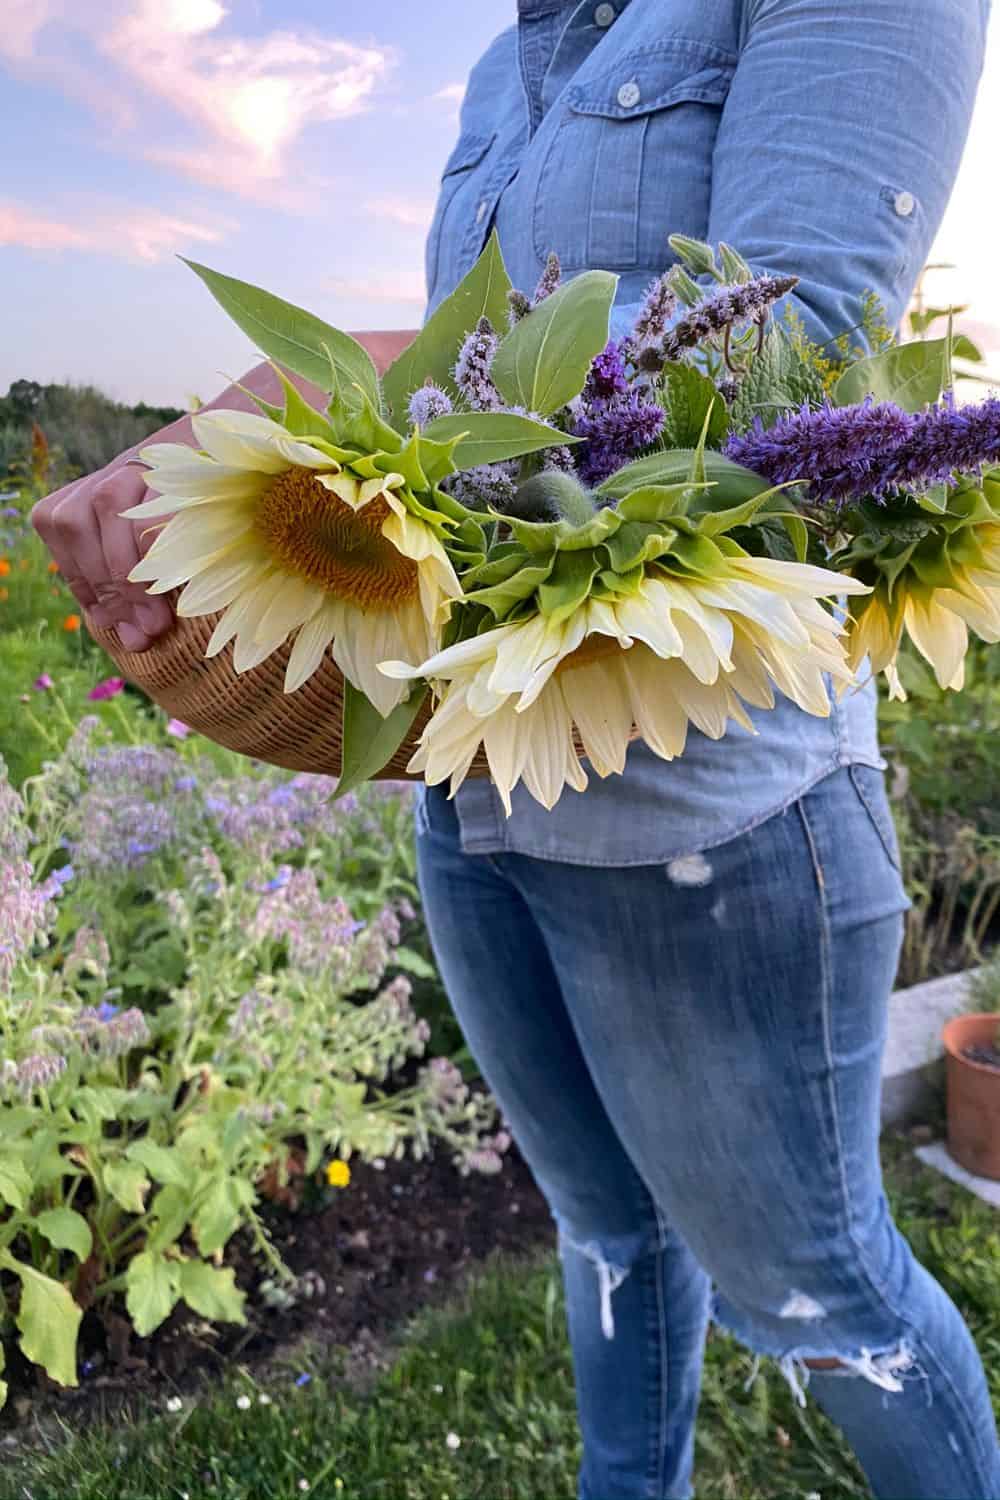 bouquet of white light sunflowers with purple flowers at sunset held by a woman in a chambray shirt